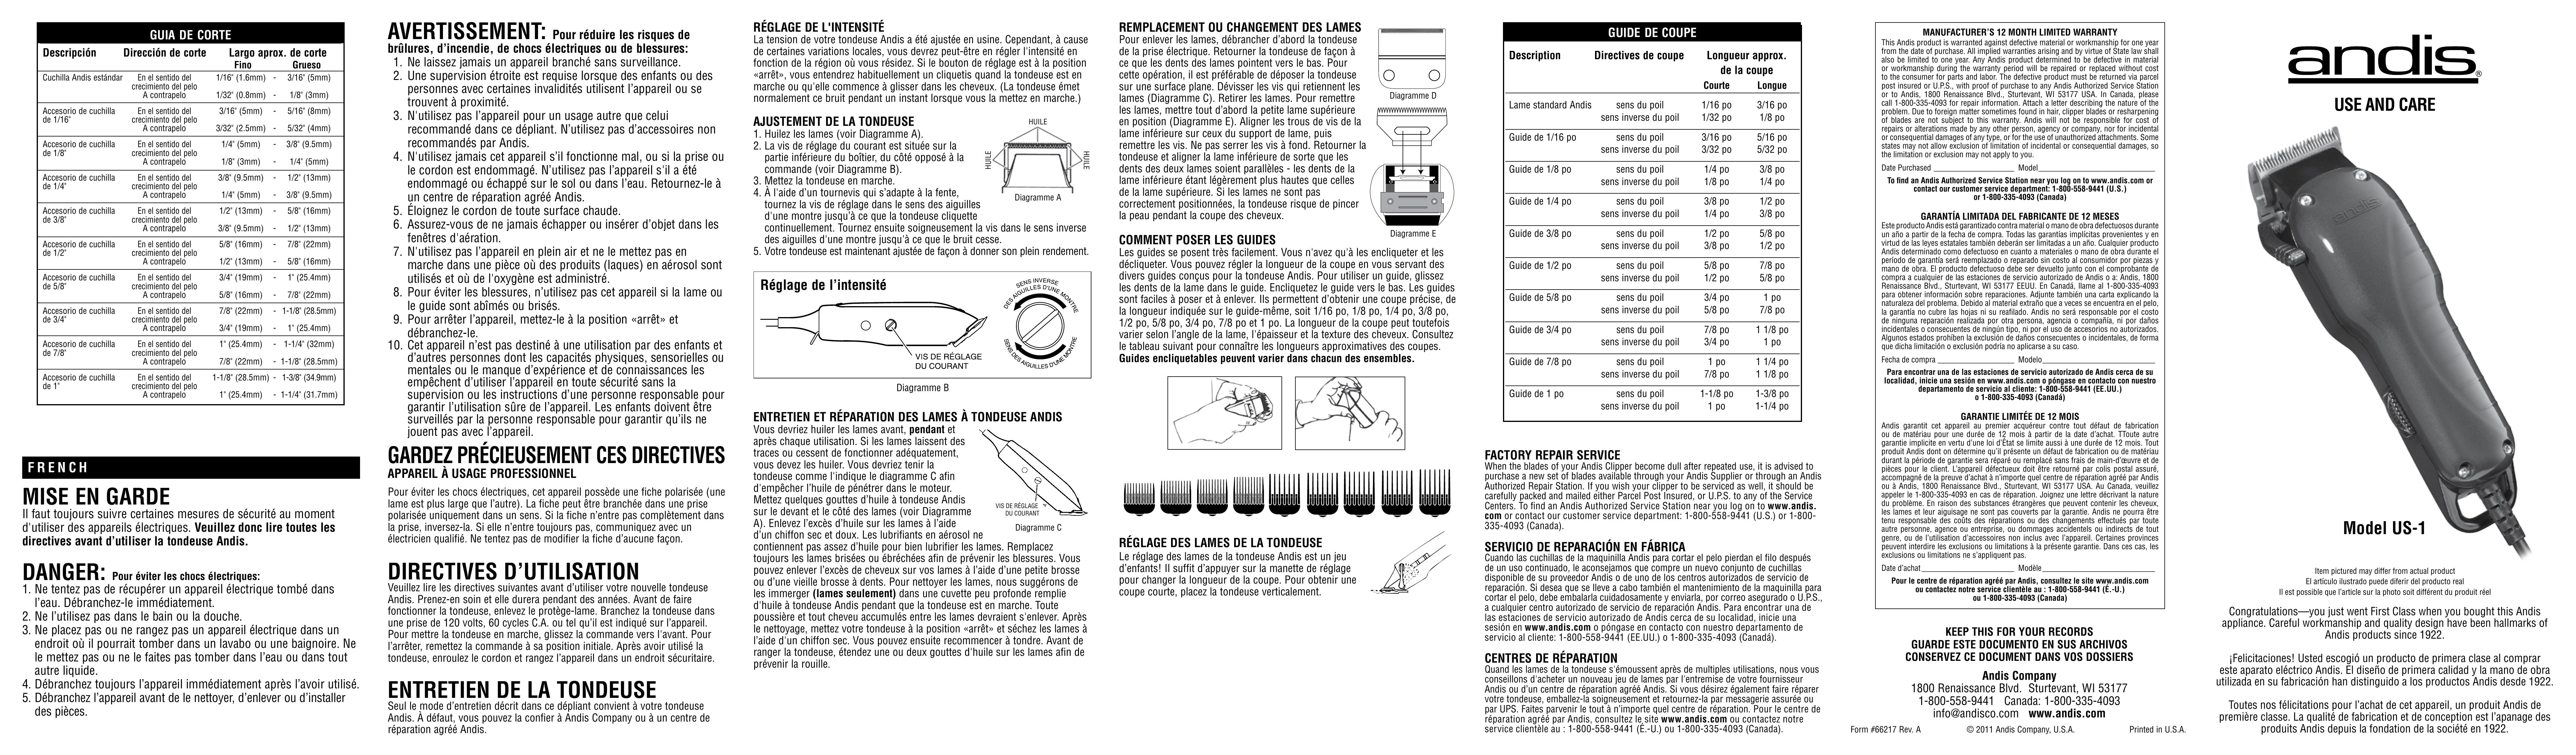 Andis Company US-1 Electric Shaver User Manual